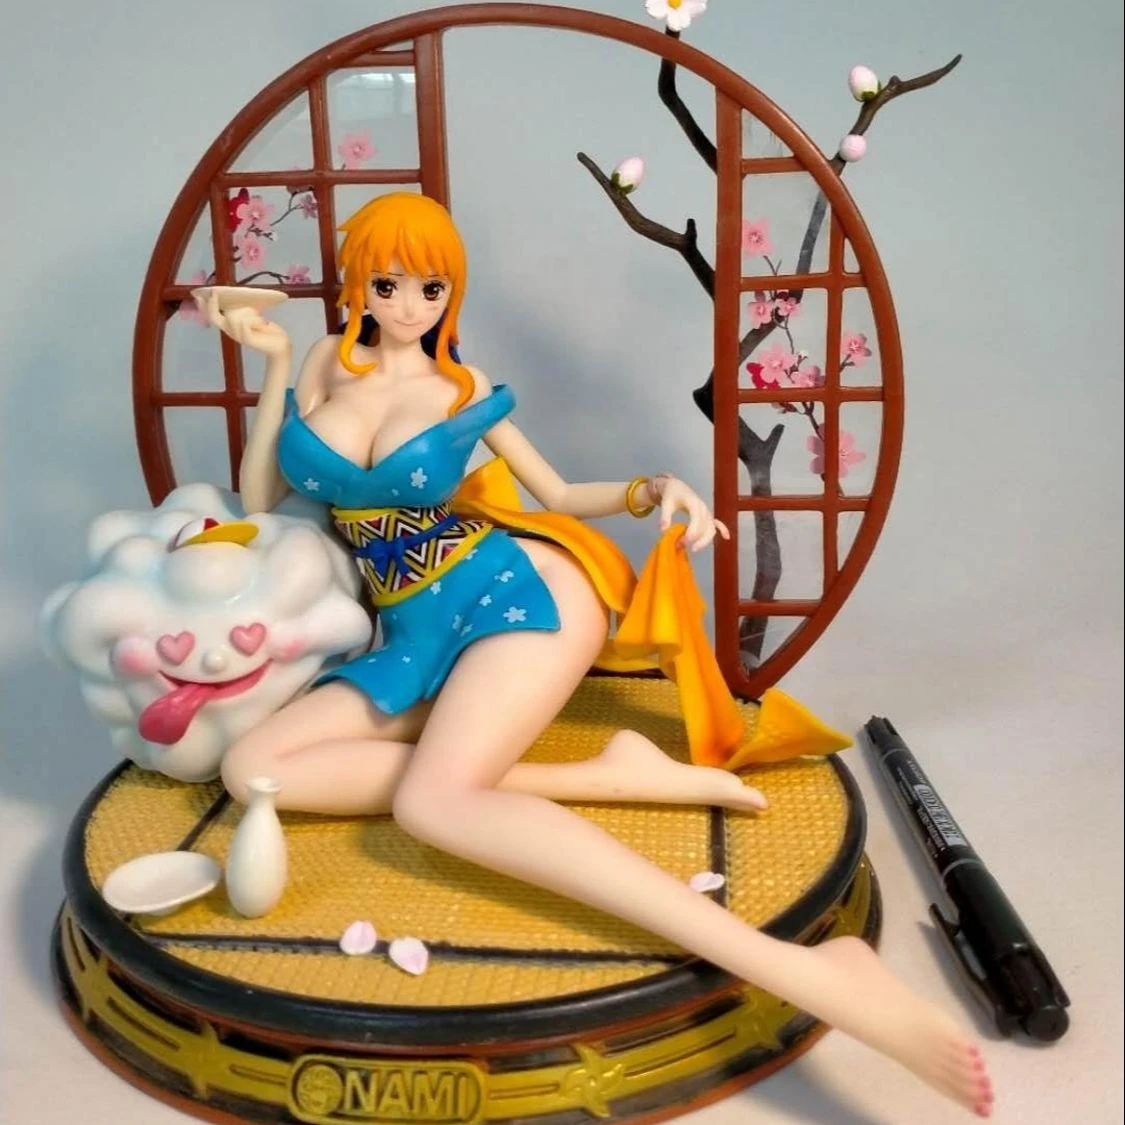 

NEW 26cm Anime Tolys One Pieced Aurora National Wind nami GK Statue PVC Action Figure Big Size Collection Model Toy Doll Gift